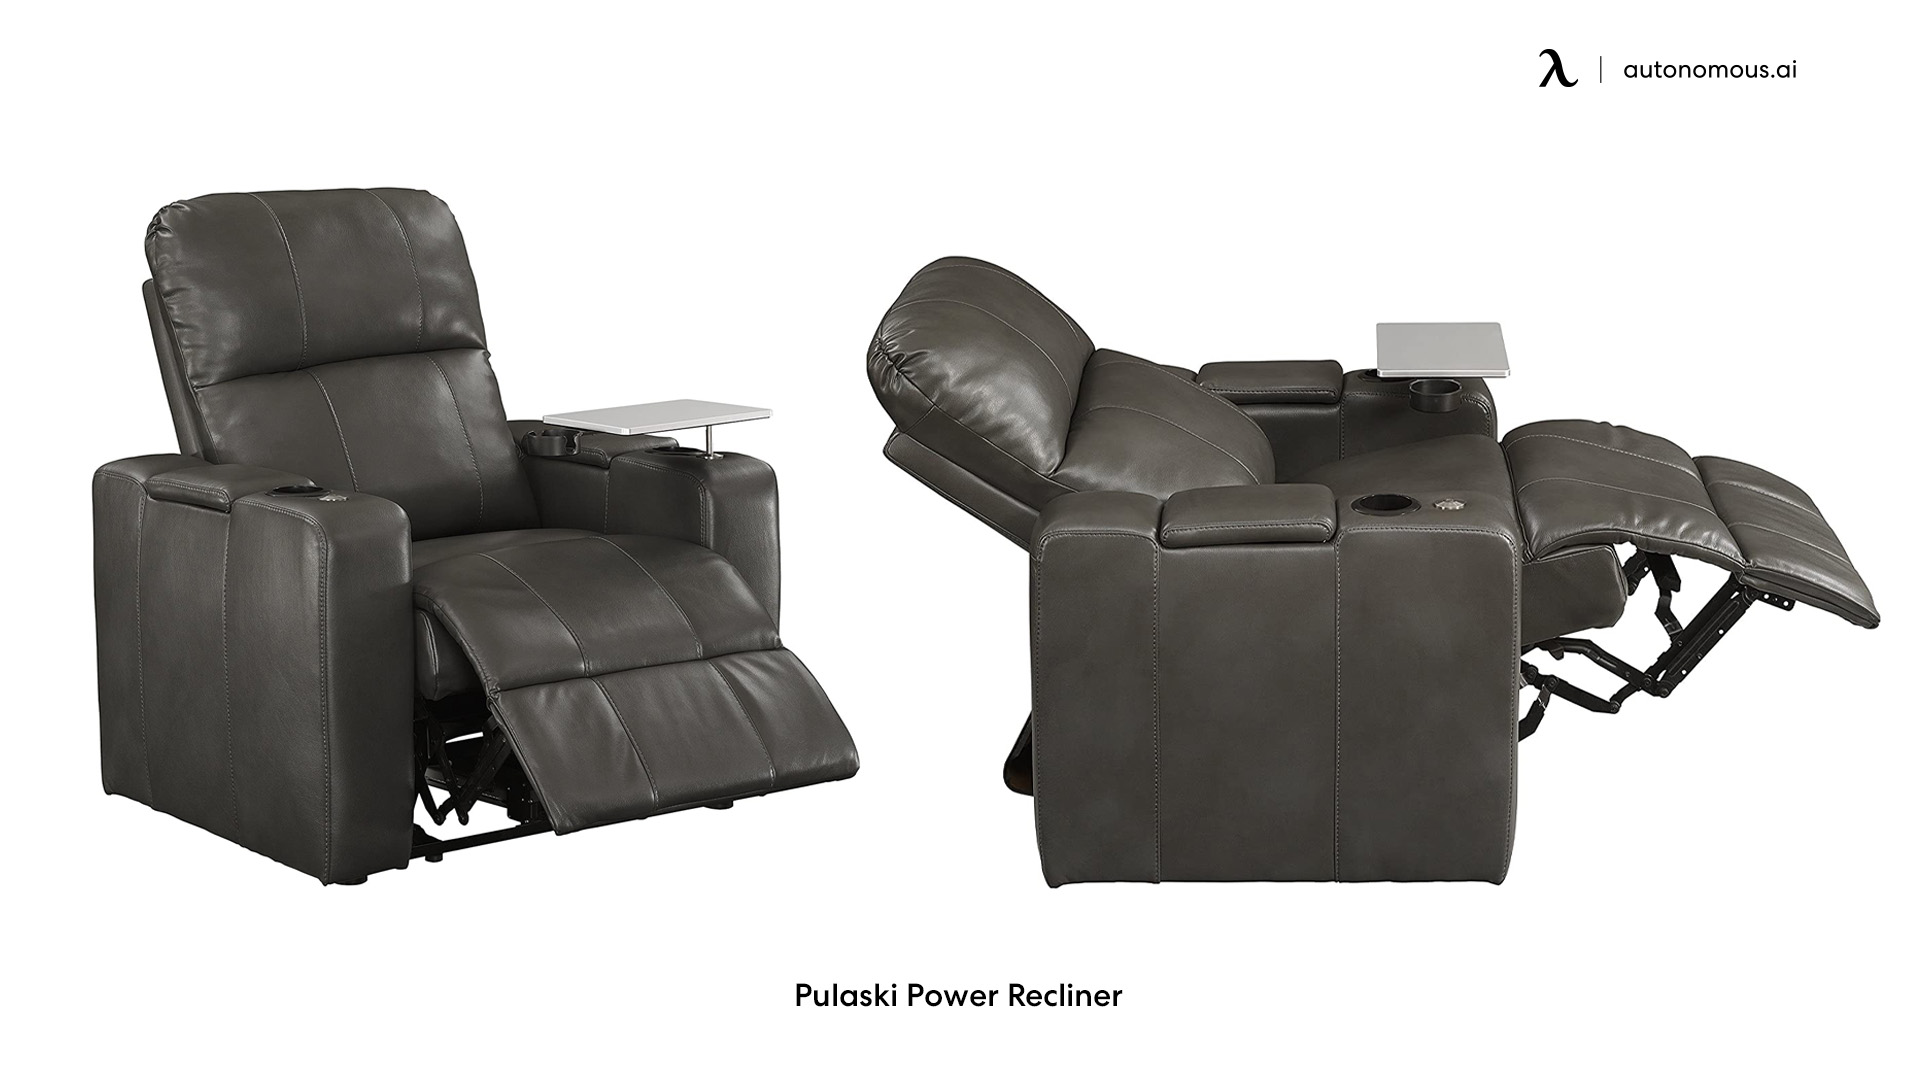 Pulaski Power Recliner ergonomic gaming chair with footrest